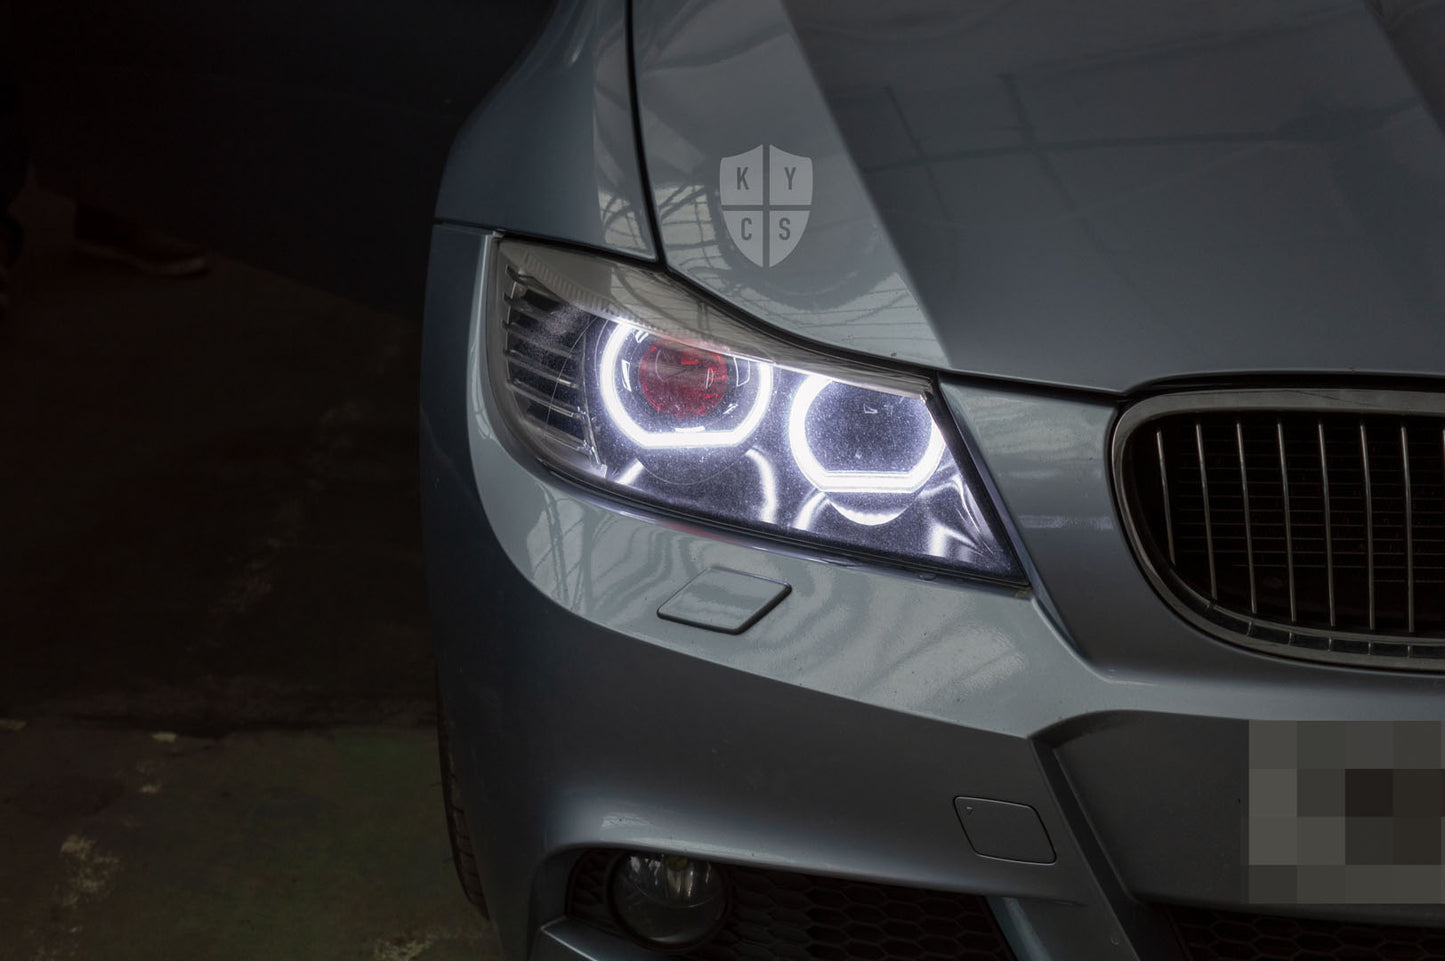 Headlight options on the above vehicle: KYCS (white) angel eyes | Classic blackout | Bi-LED 2.5" projector with LED bulb | Red demon eye | Move high beam to low beam bi-LED projector | LED indicators